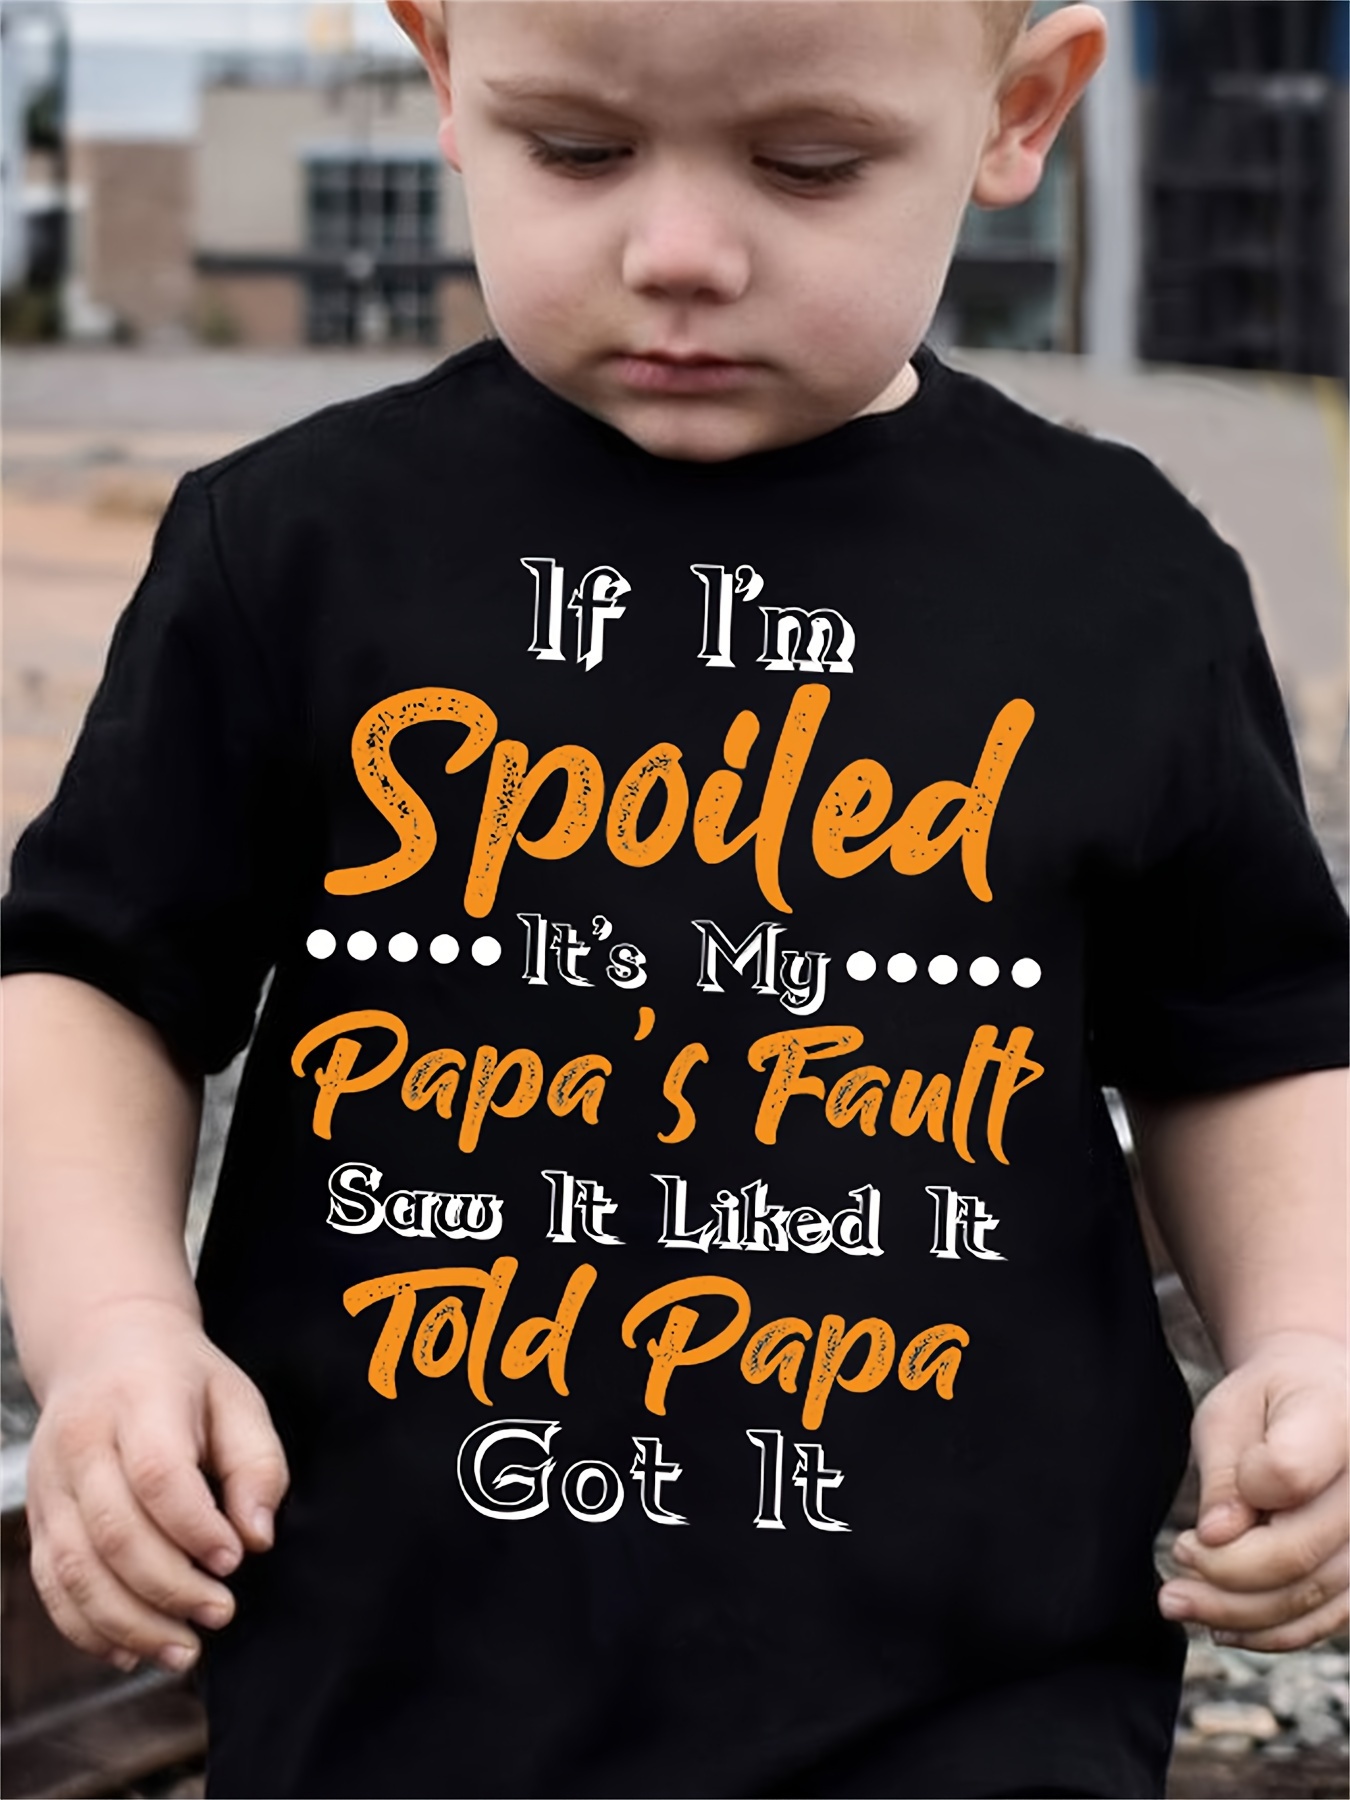 I'm A Spoiled Daughter T-shirt From Awesome Dad, Funny Father